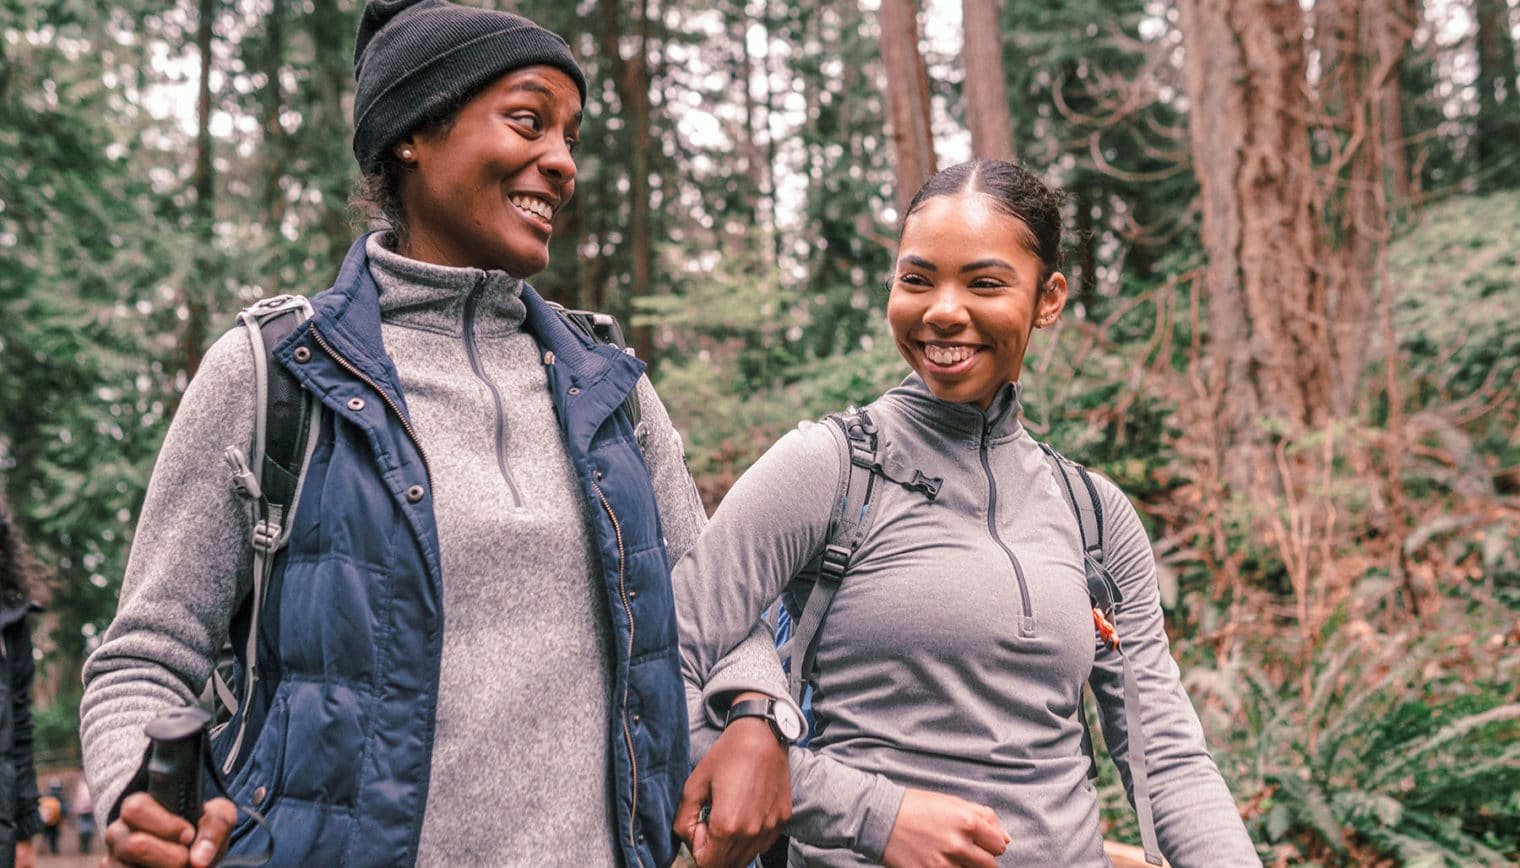 Two women hiking together.